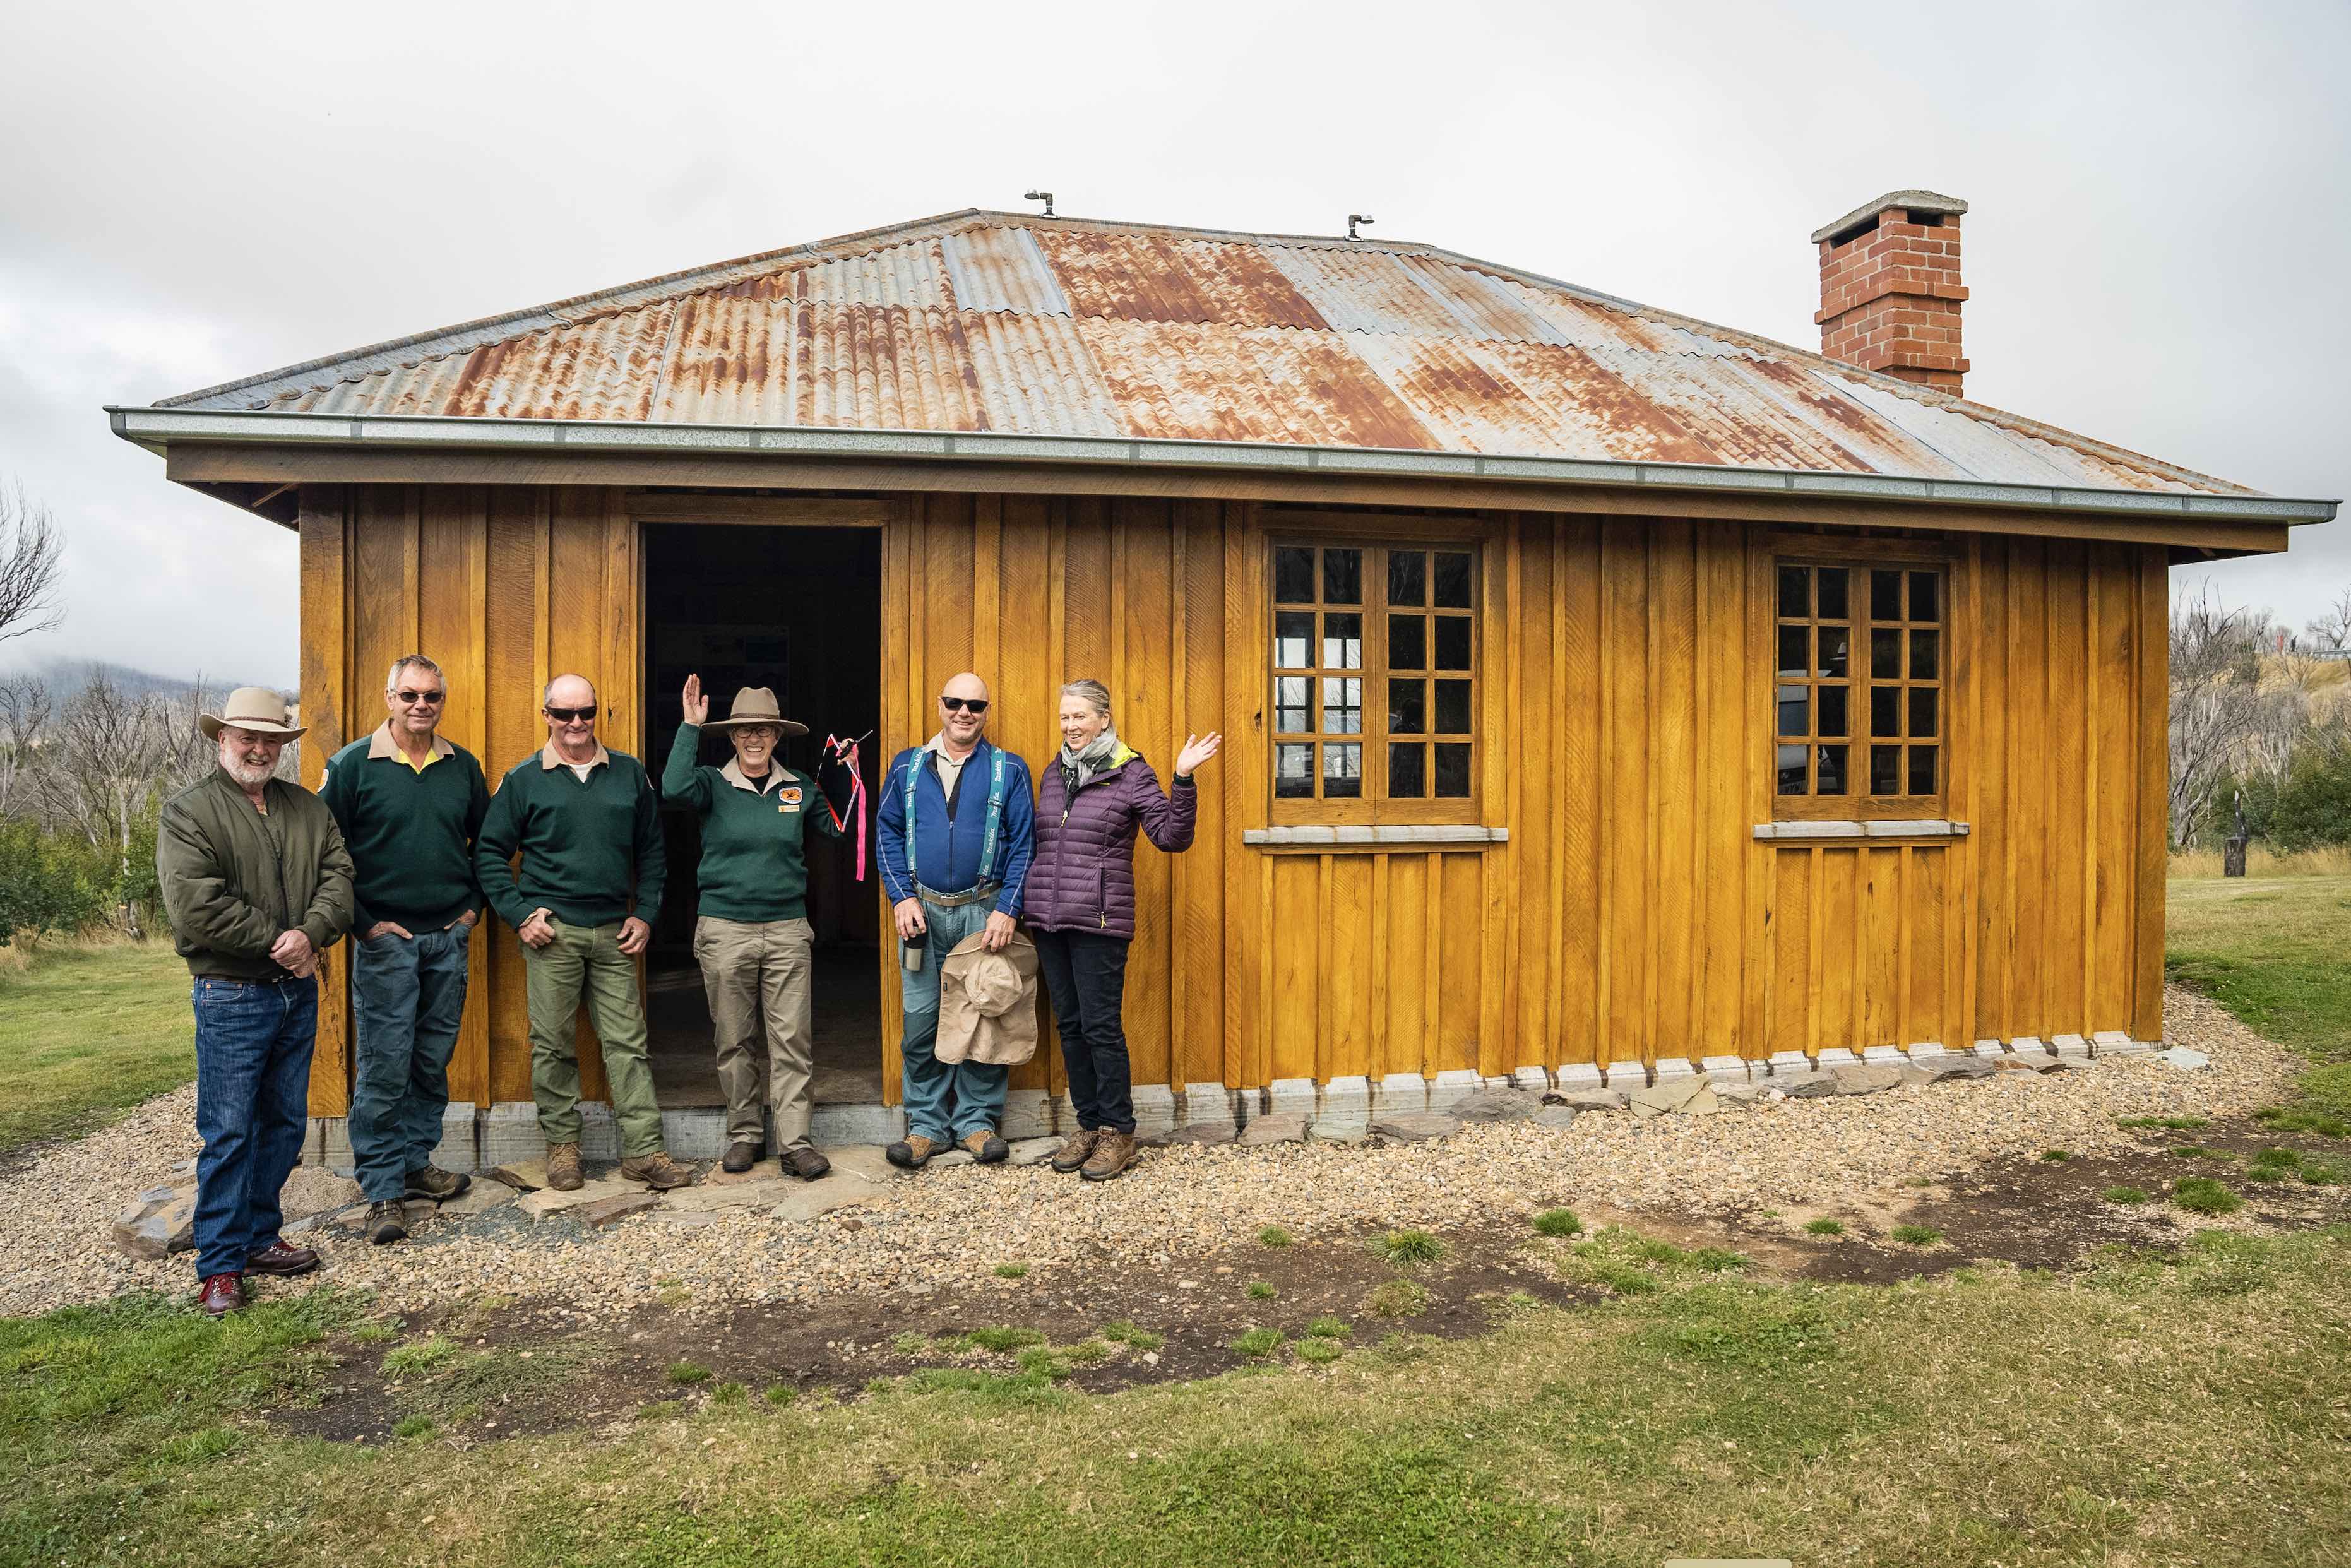 Bob Moon, Peter Dow, Roger Rosenbloom, Megan Bowden, Simon Buckpitt and Susan Learmont at the opening of the Rest House at Sawyers Hill (Sawyers Hut)